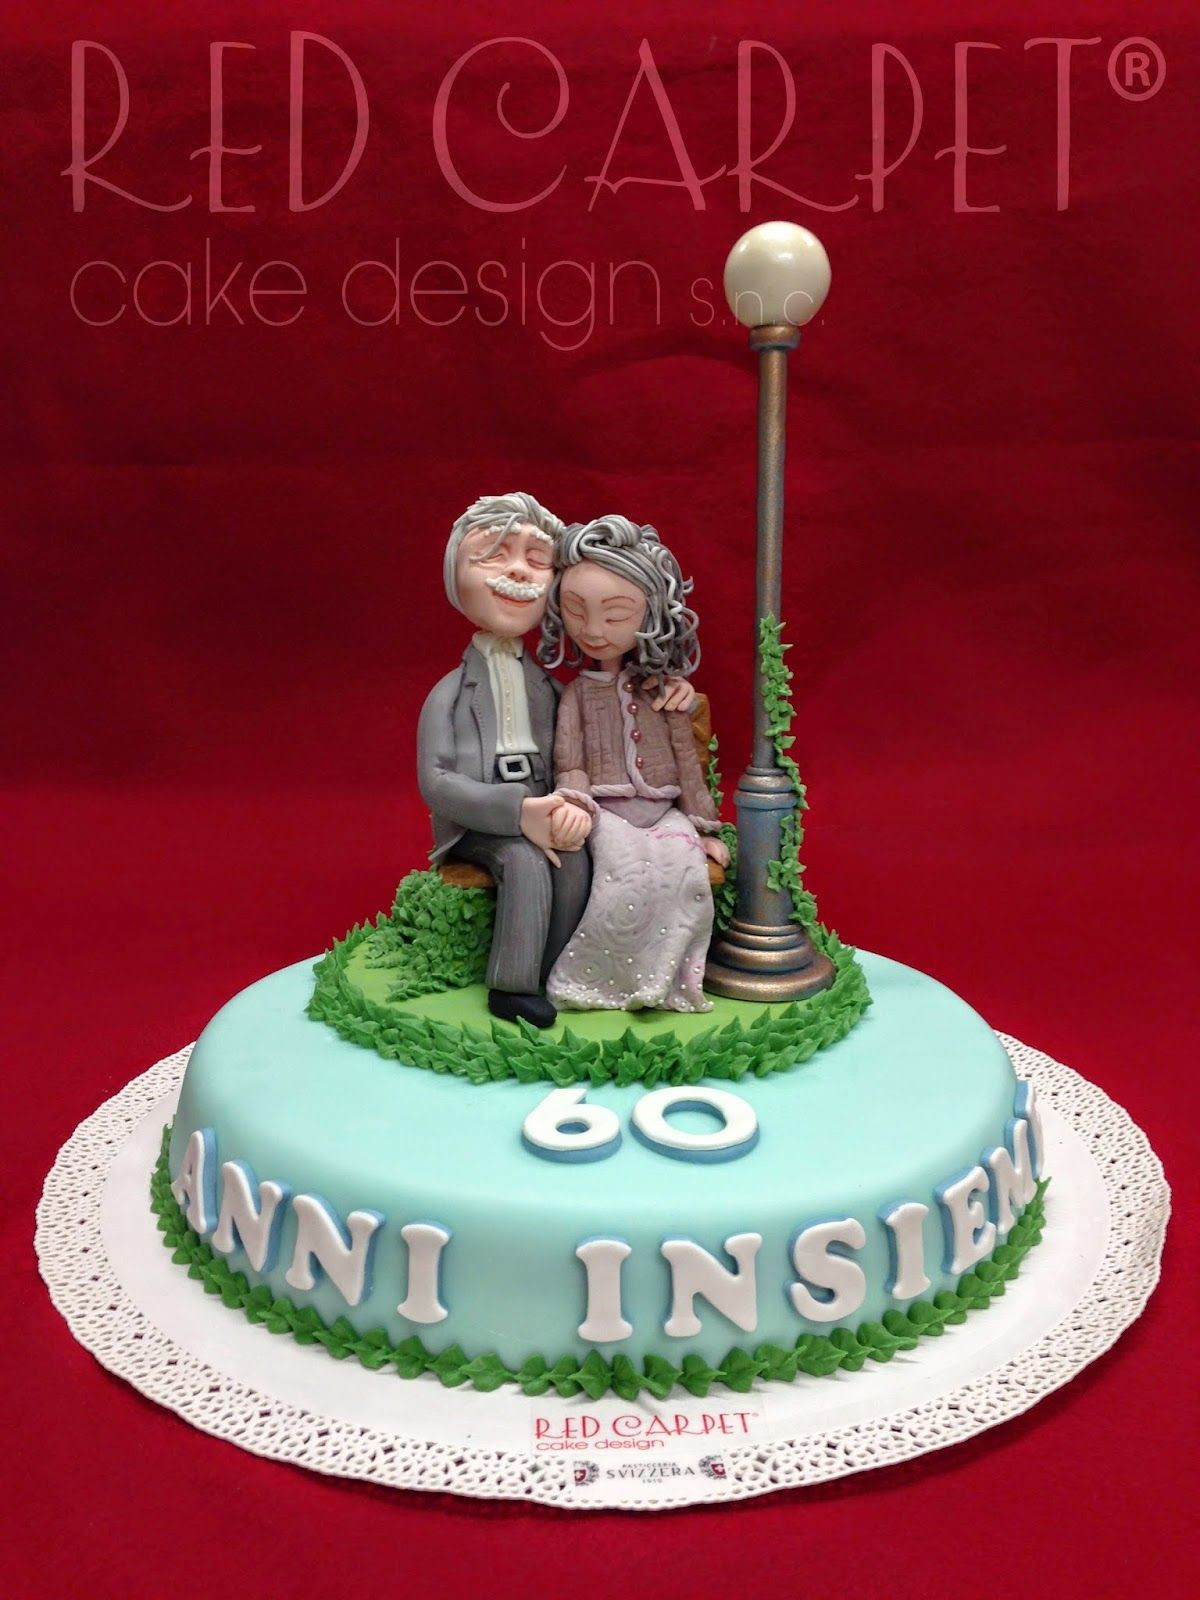 Wedding Gift Ideas For Older Couple
 OLD COUPLE IN LOVE 60° ANNIVERSARY by Red Carpet Cake Design